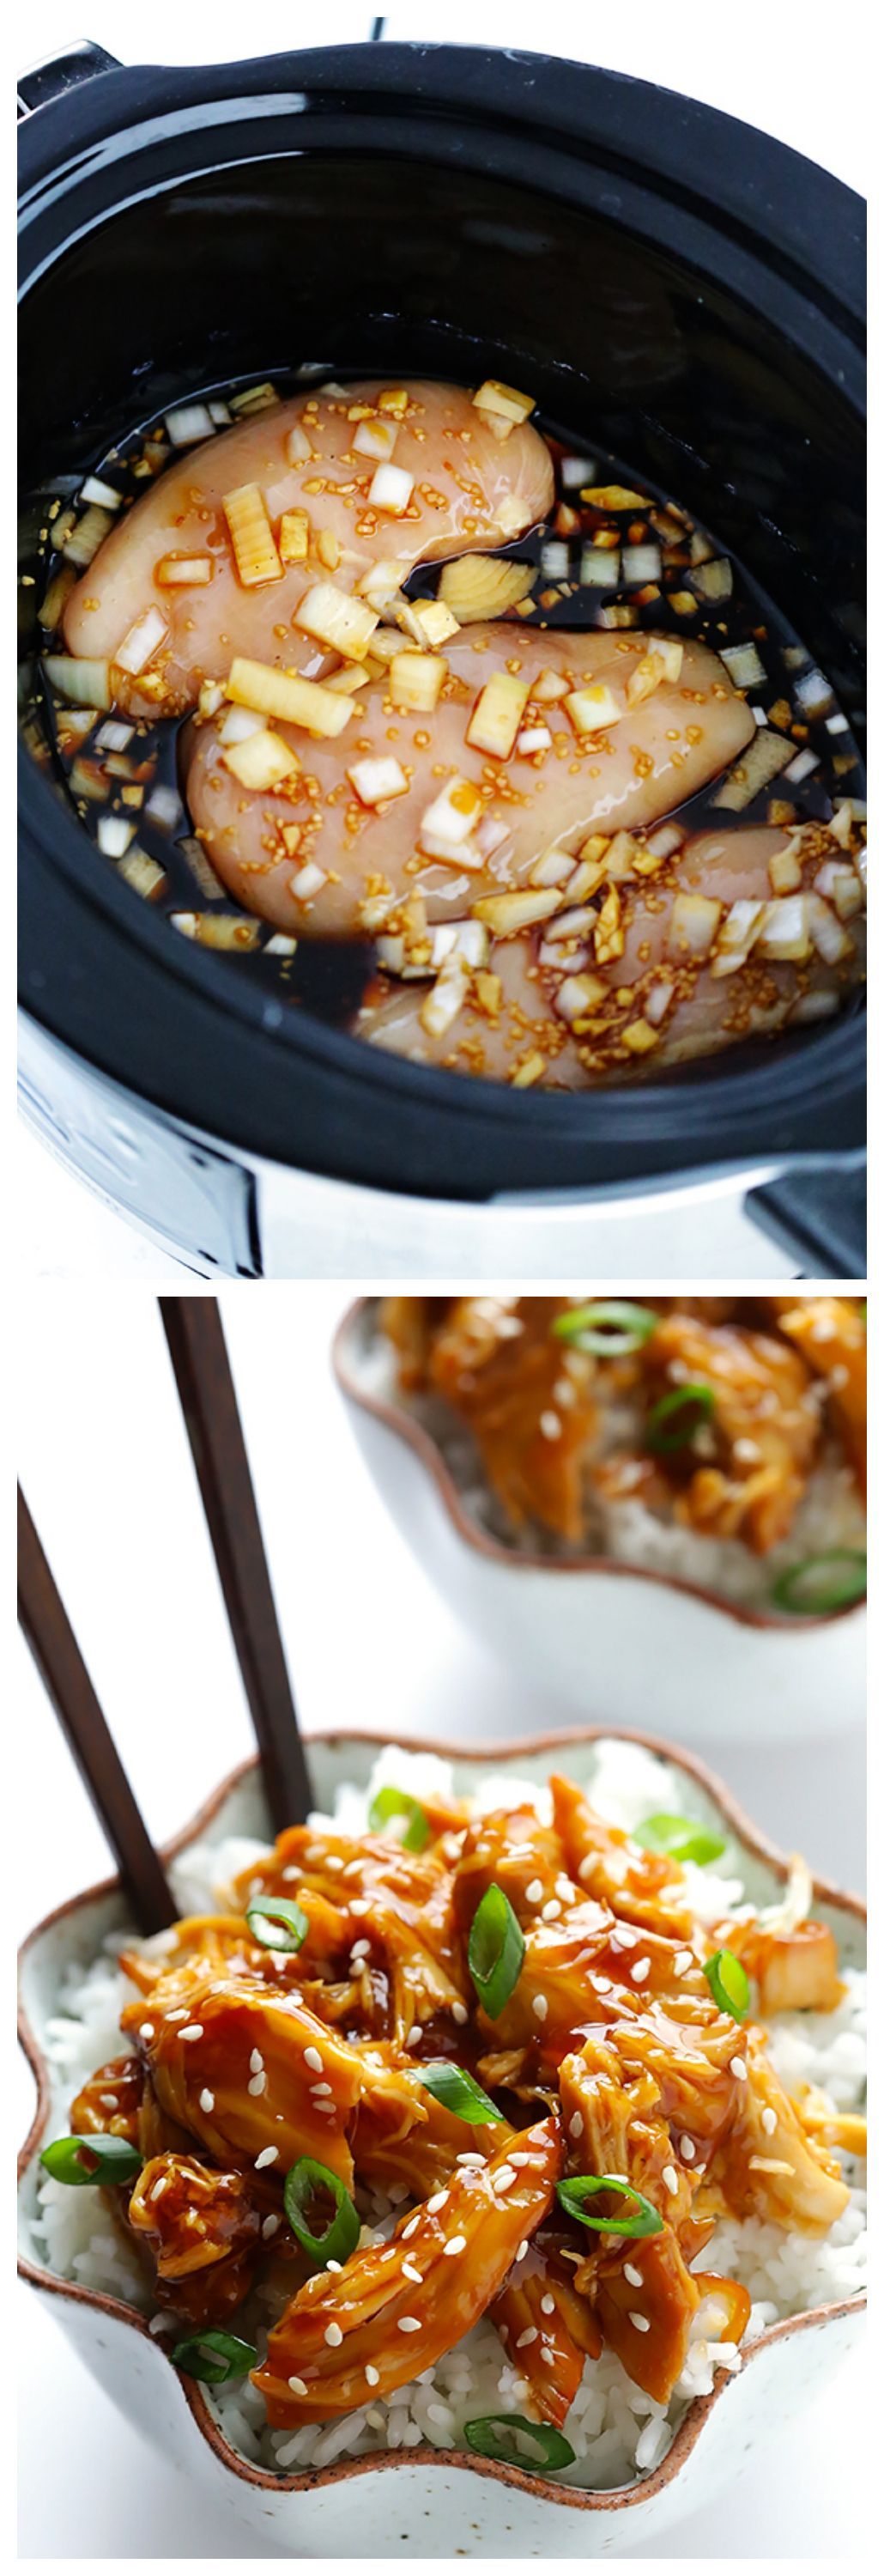 Slow Cooker Teriyaki Chicken — easy to make, and perfect for serving over rice, or in sandwiches, or whatever sounds good! |